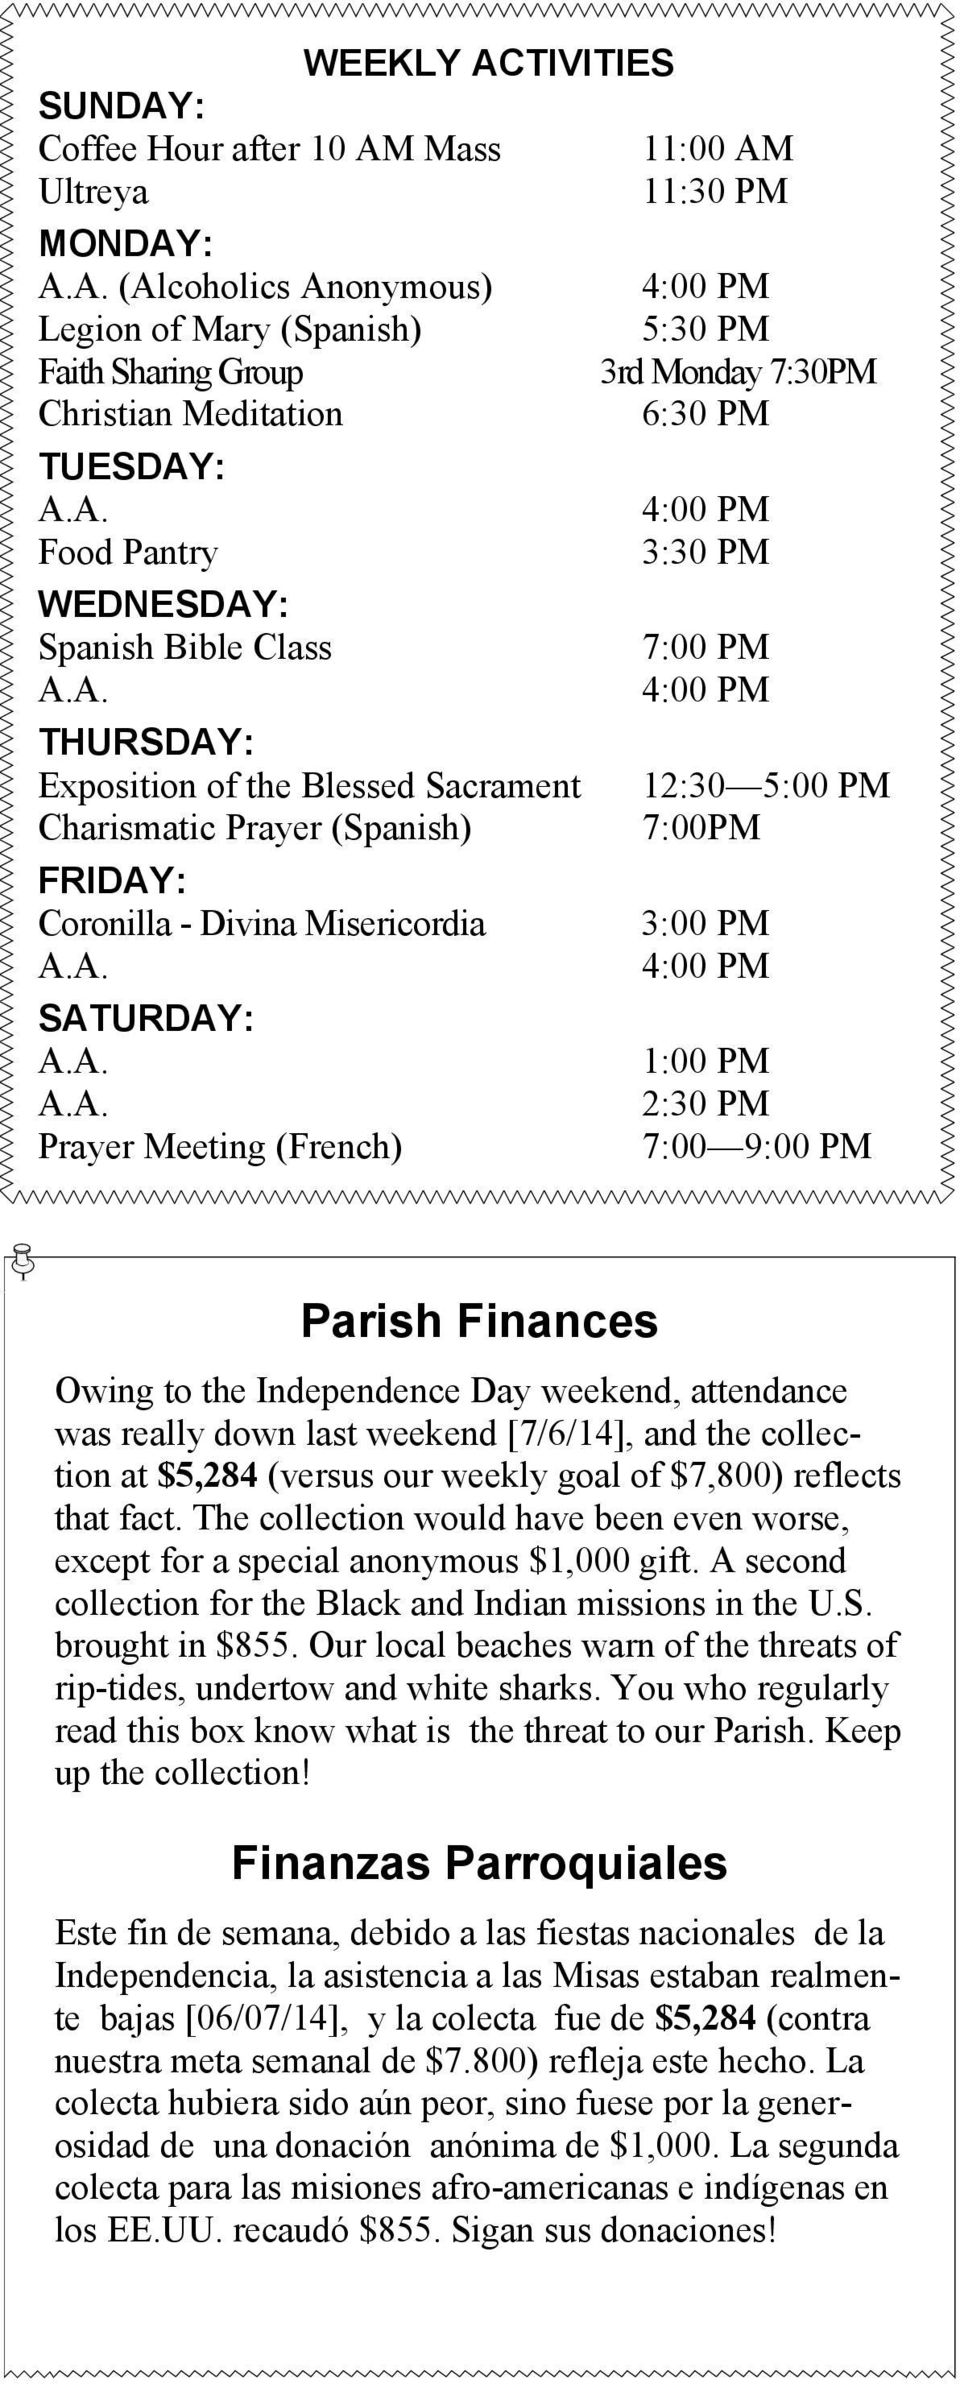 Coronilla - Divina Misericordia 3:00 PM SATURDAY: 1:00 PM 2:30 PM Prayer Meeting (French) 7:00 9:00 PM Parish Finances Owing to the Independence Day weekend, attendance was really down last weekend